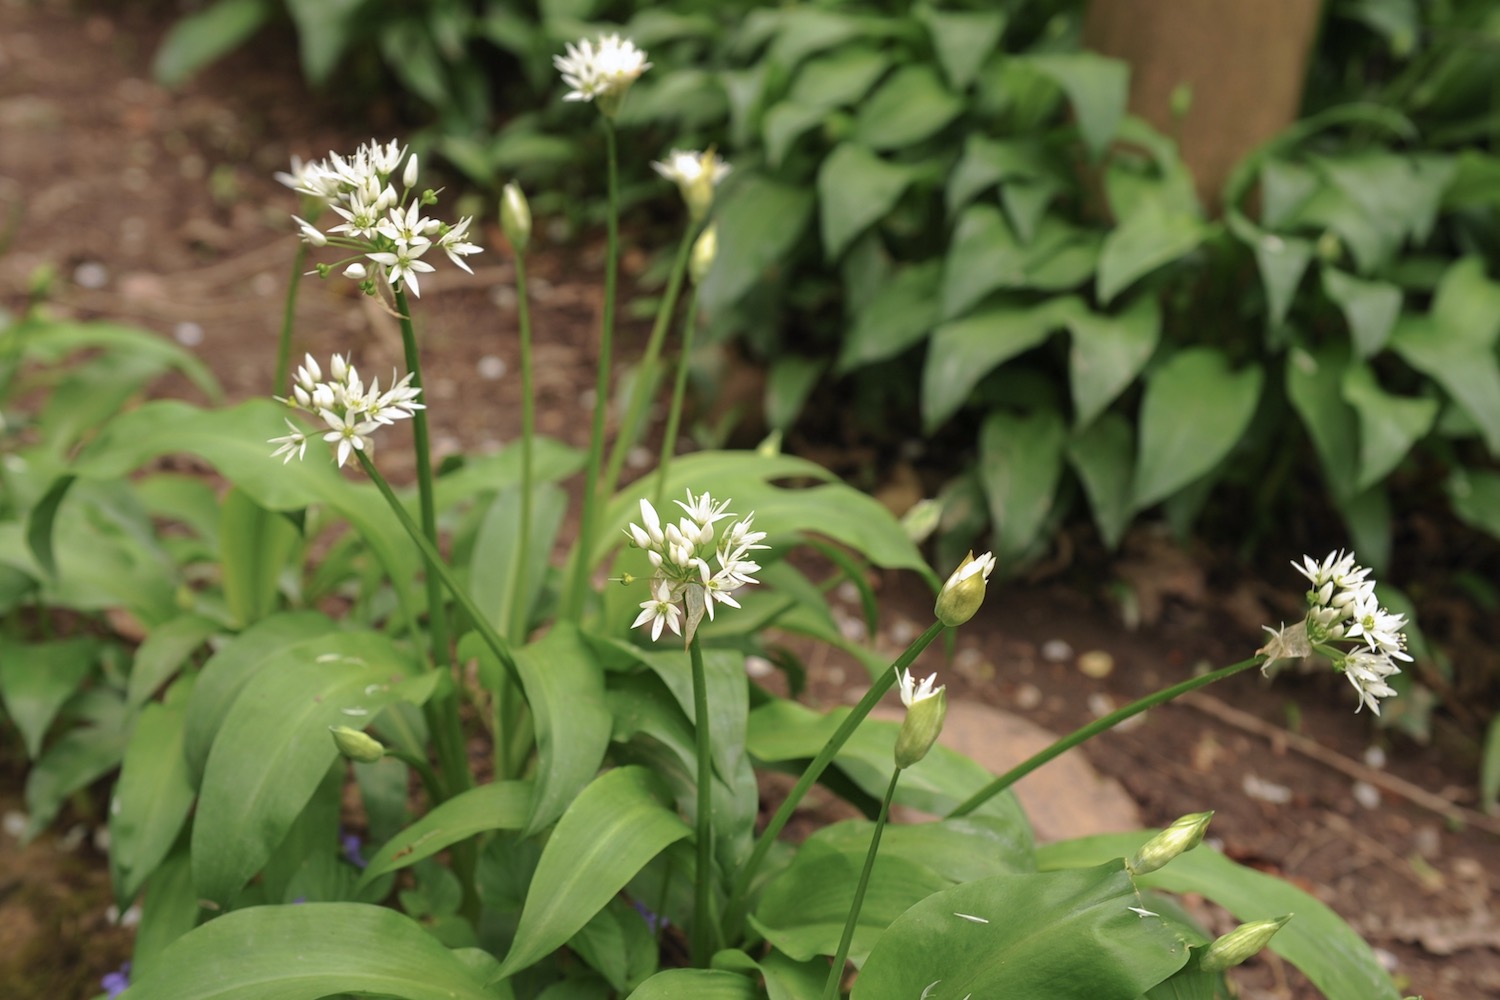 A close up picture of white star-shaped wild garlic flowers